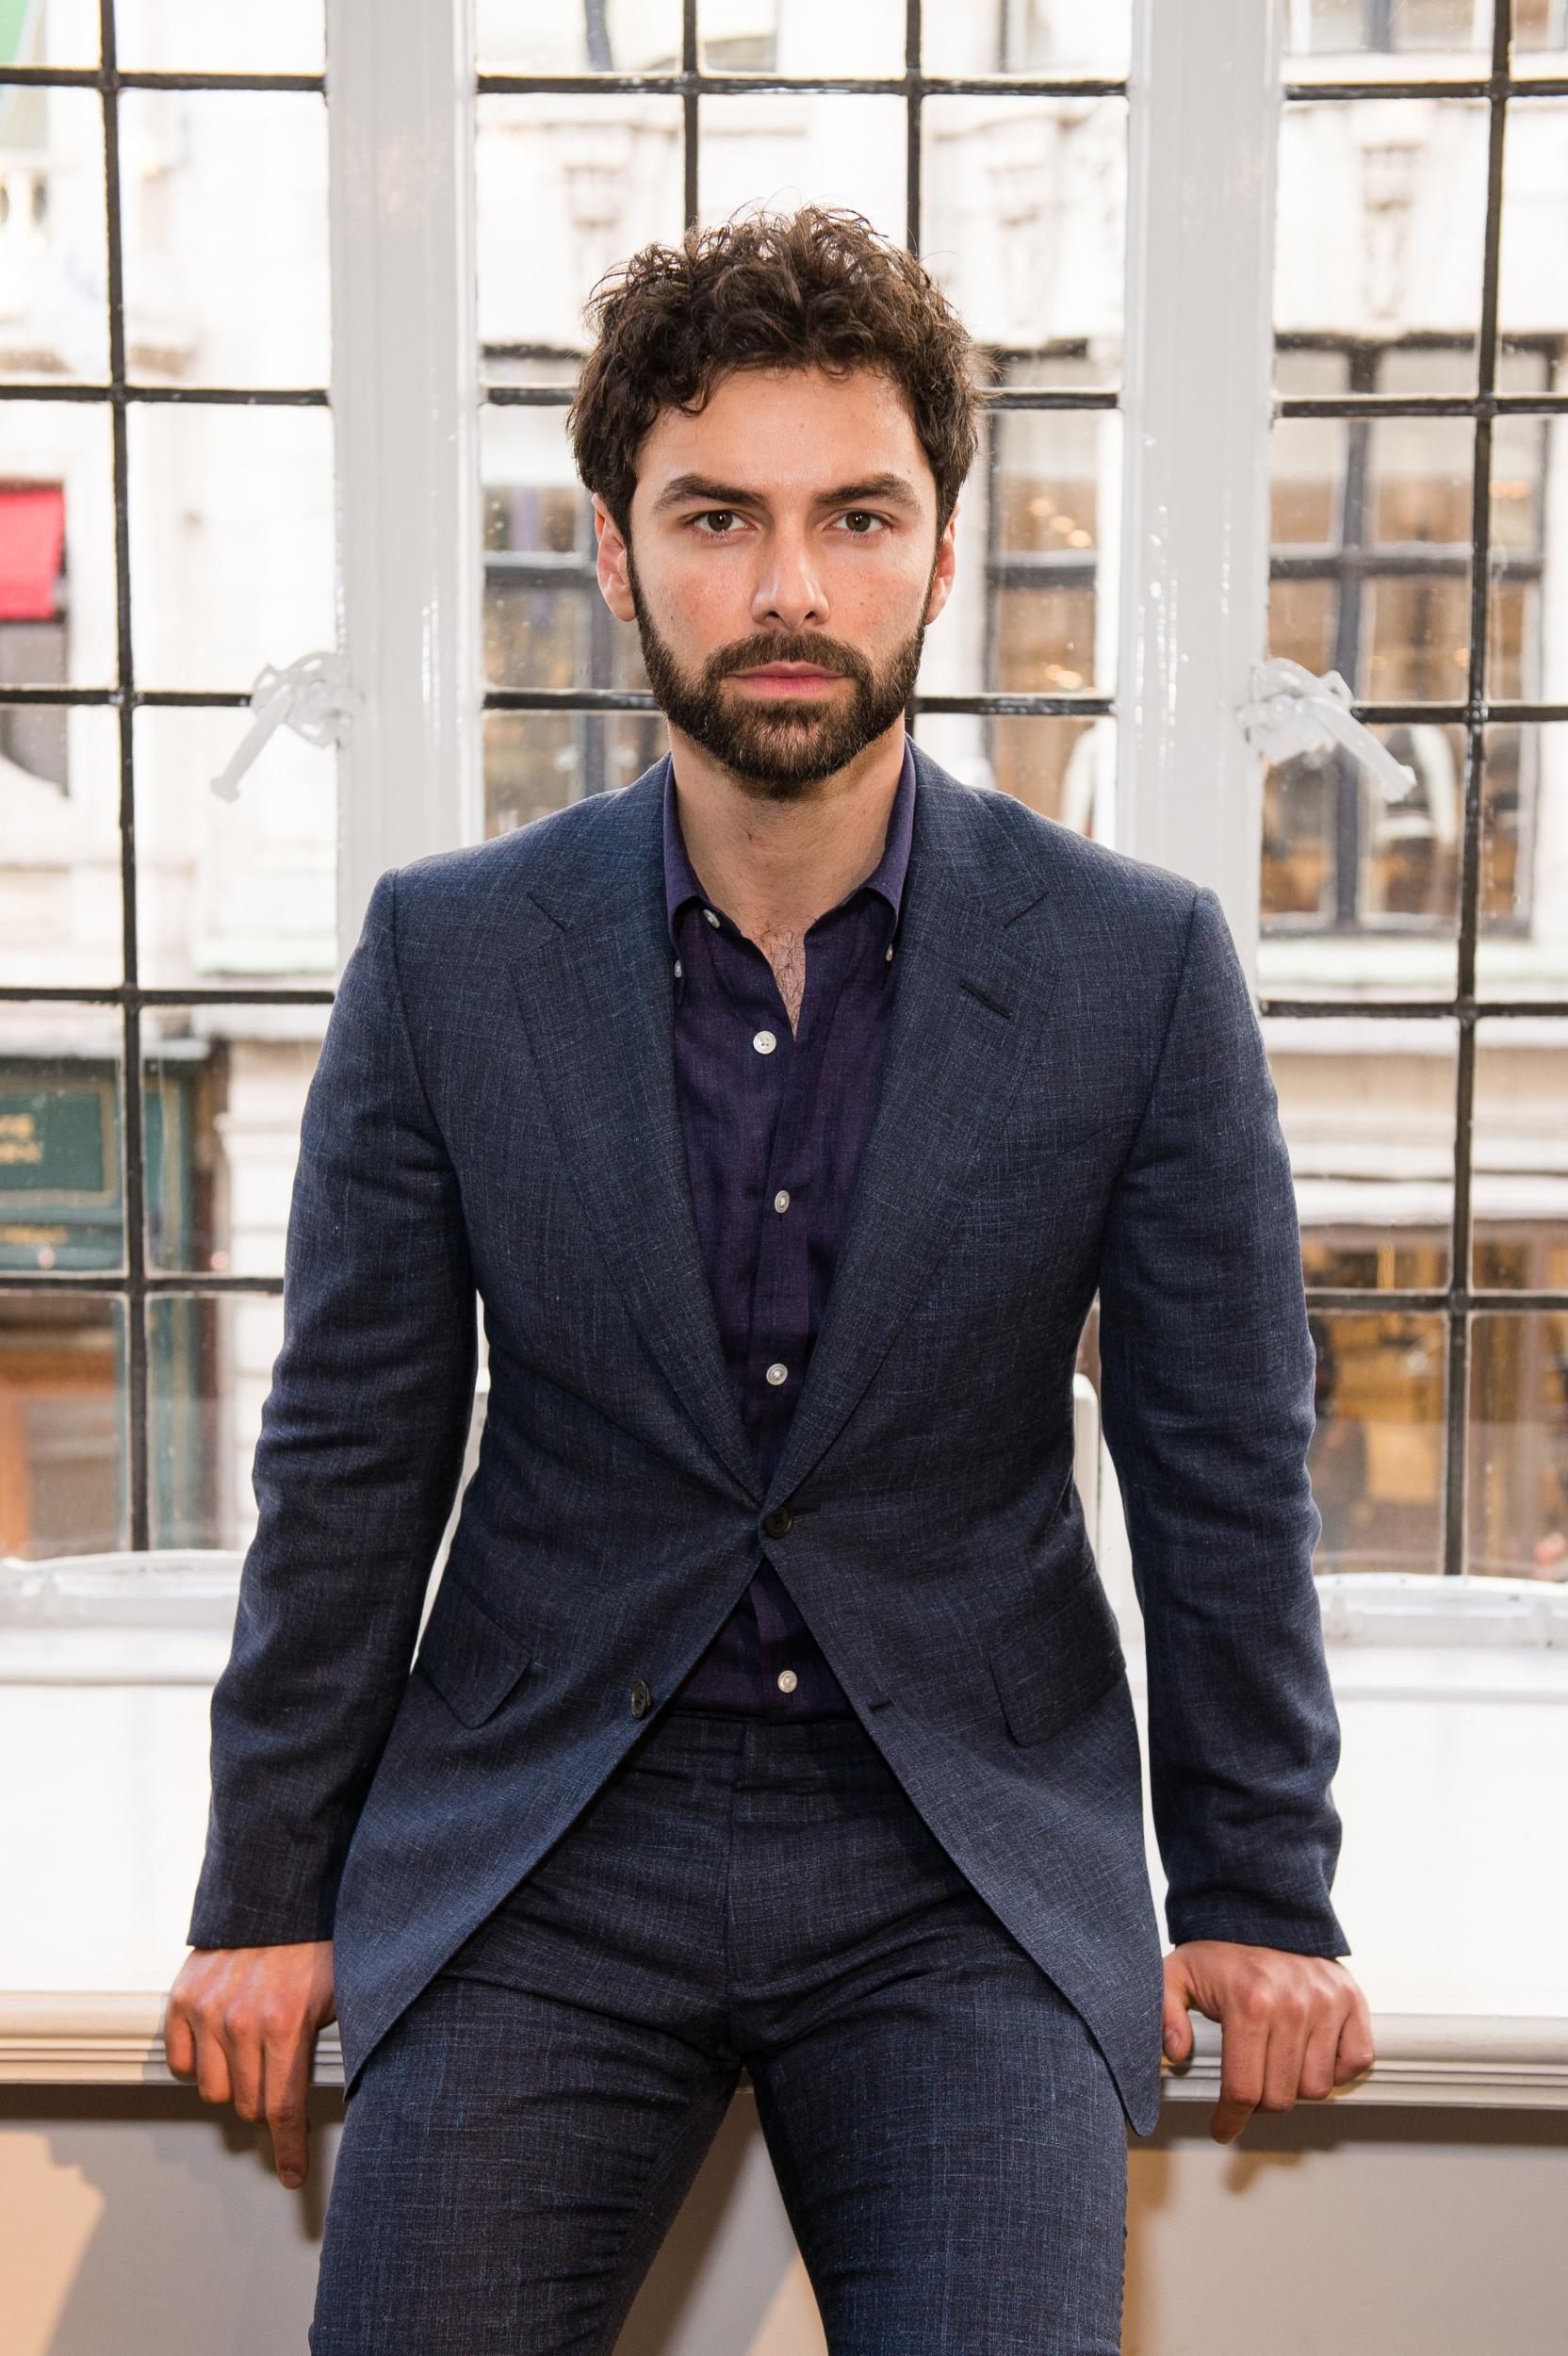 Aidan Turner attends the Dunhill London presentation during the London Fashion Week Men’s June 2017 collections on June 9, 2017 in London, England.